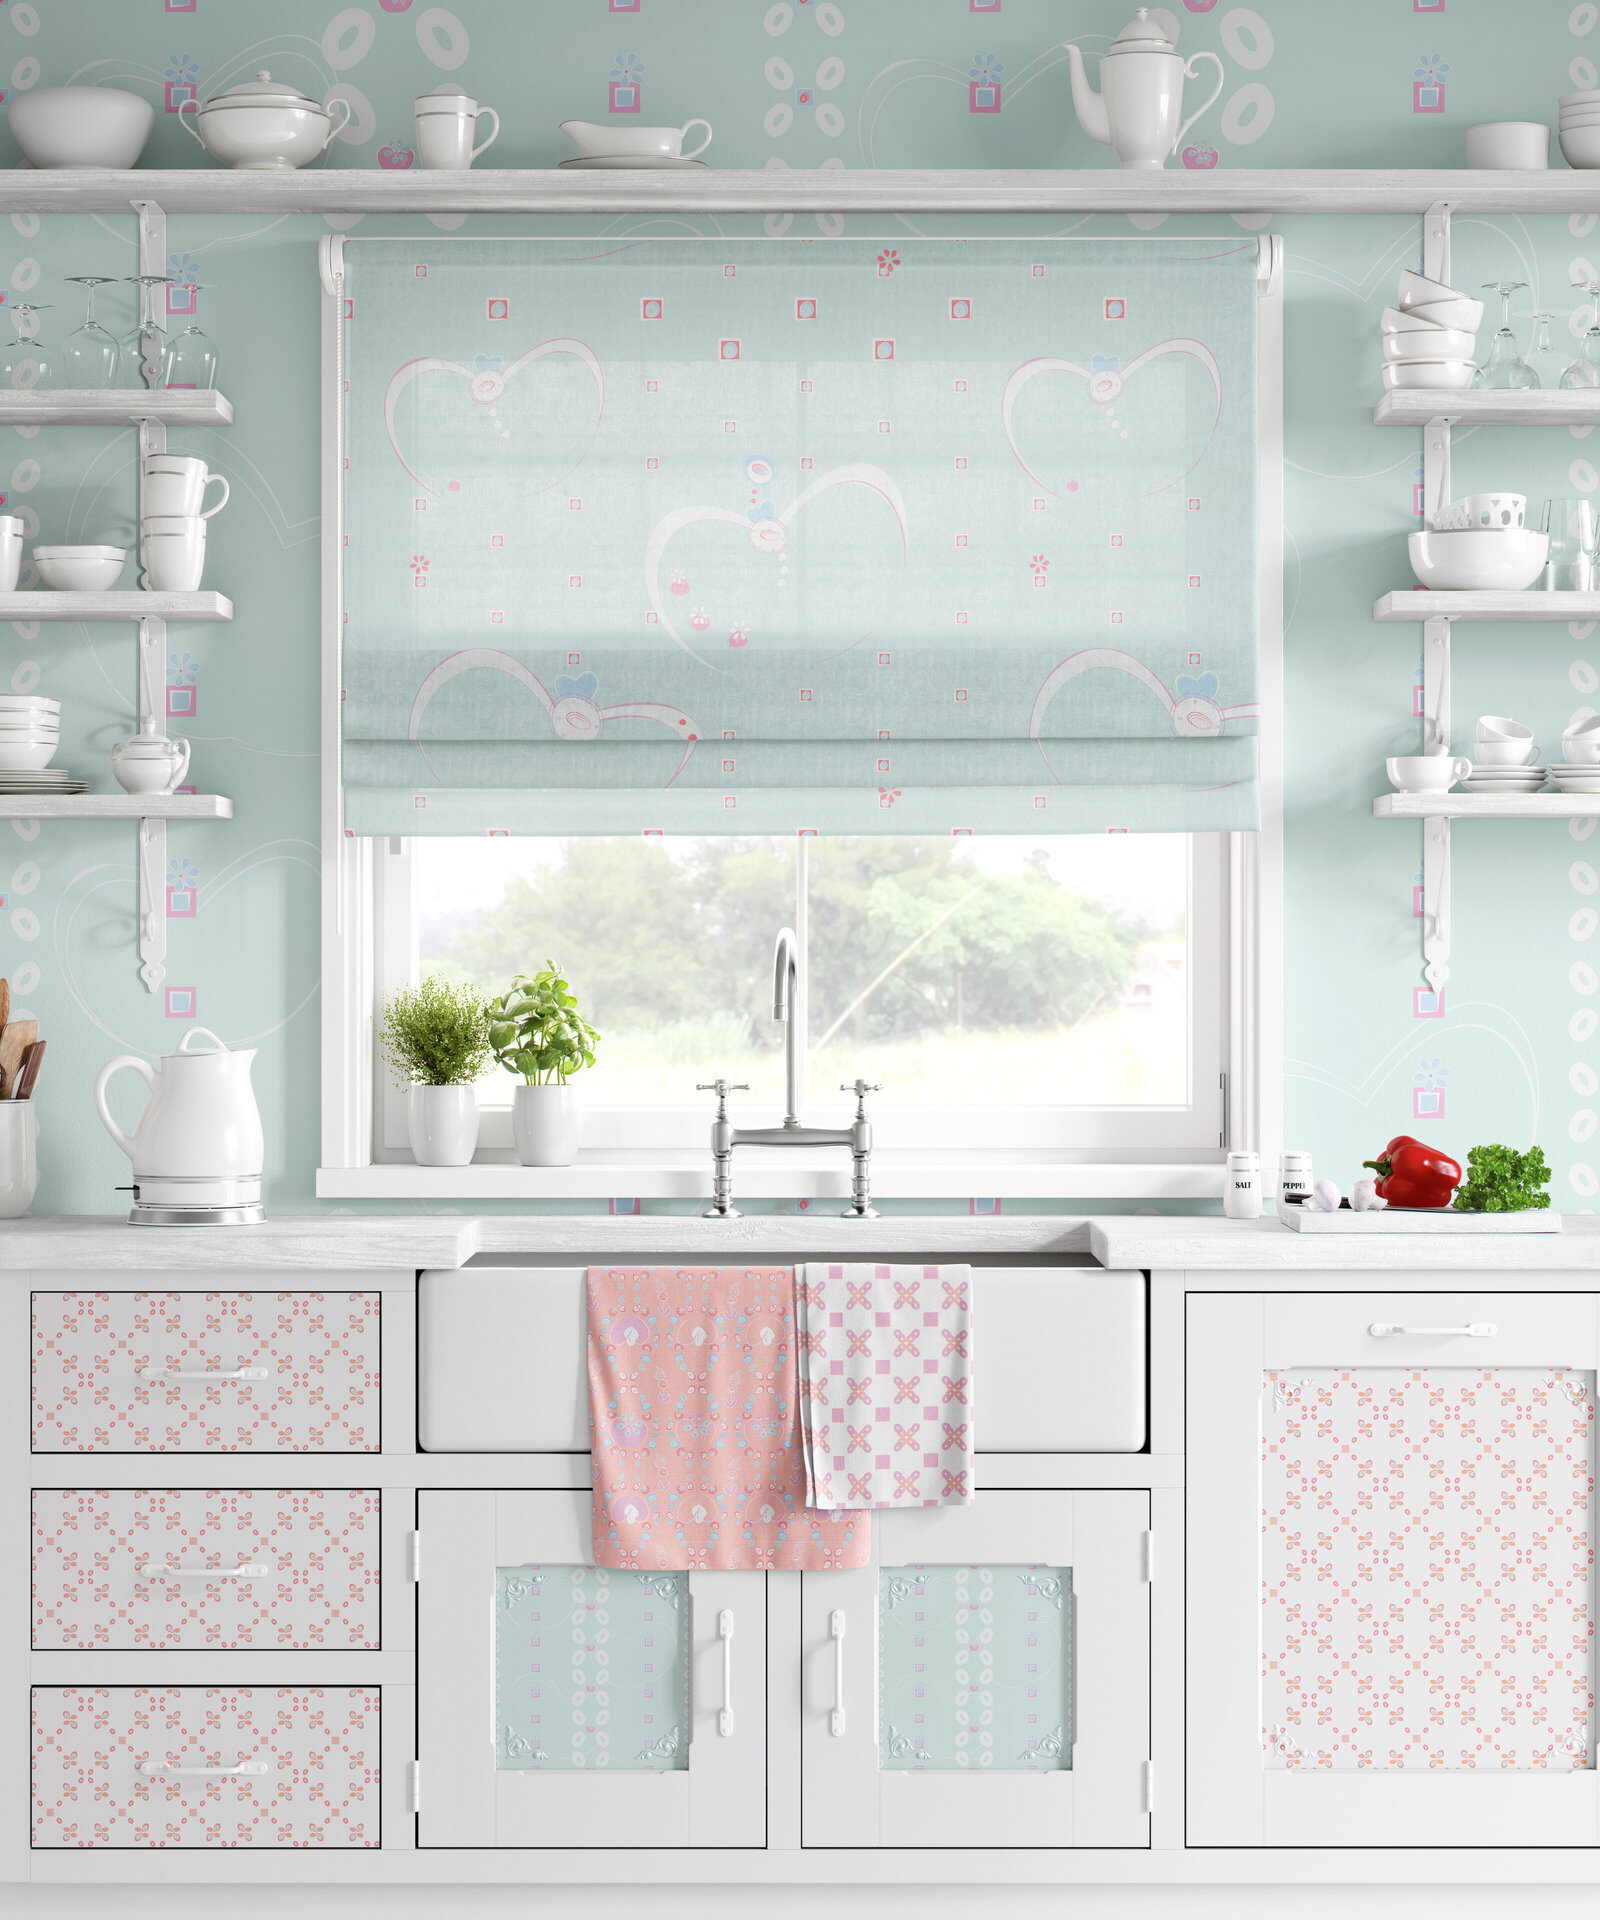 Bright kitchen with patterned cabinets and kitchen towels